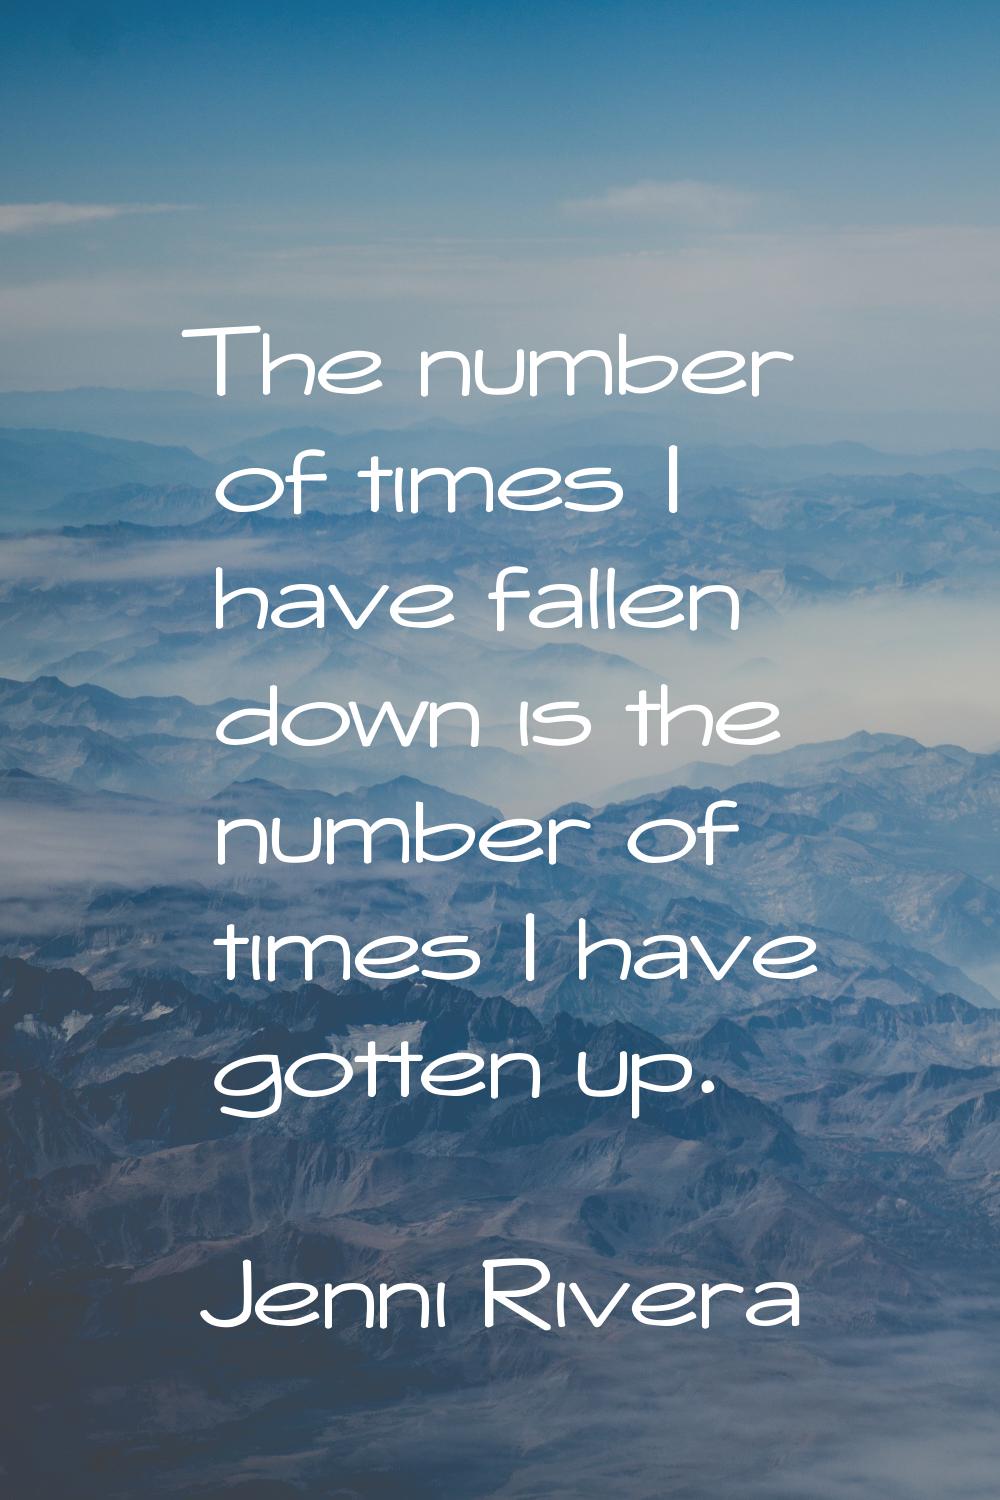 The number of times I have fallen down is the number of times I have gotten up.